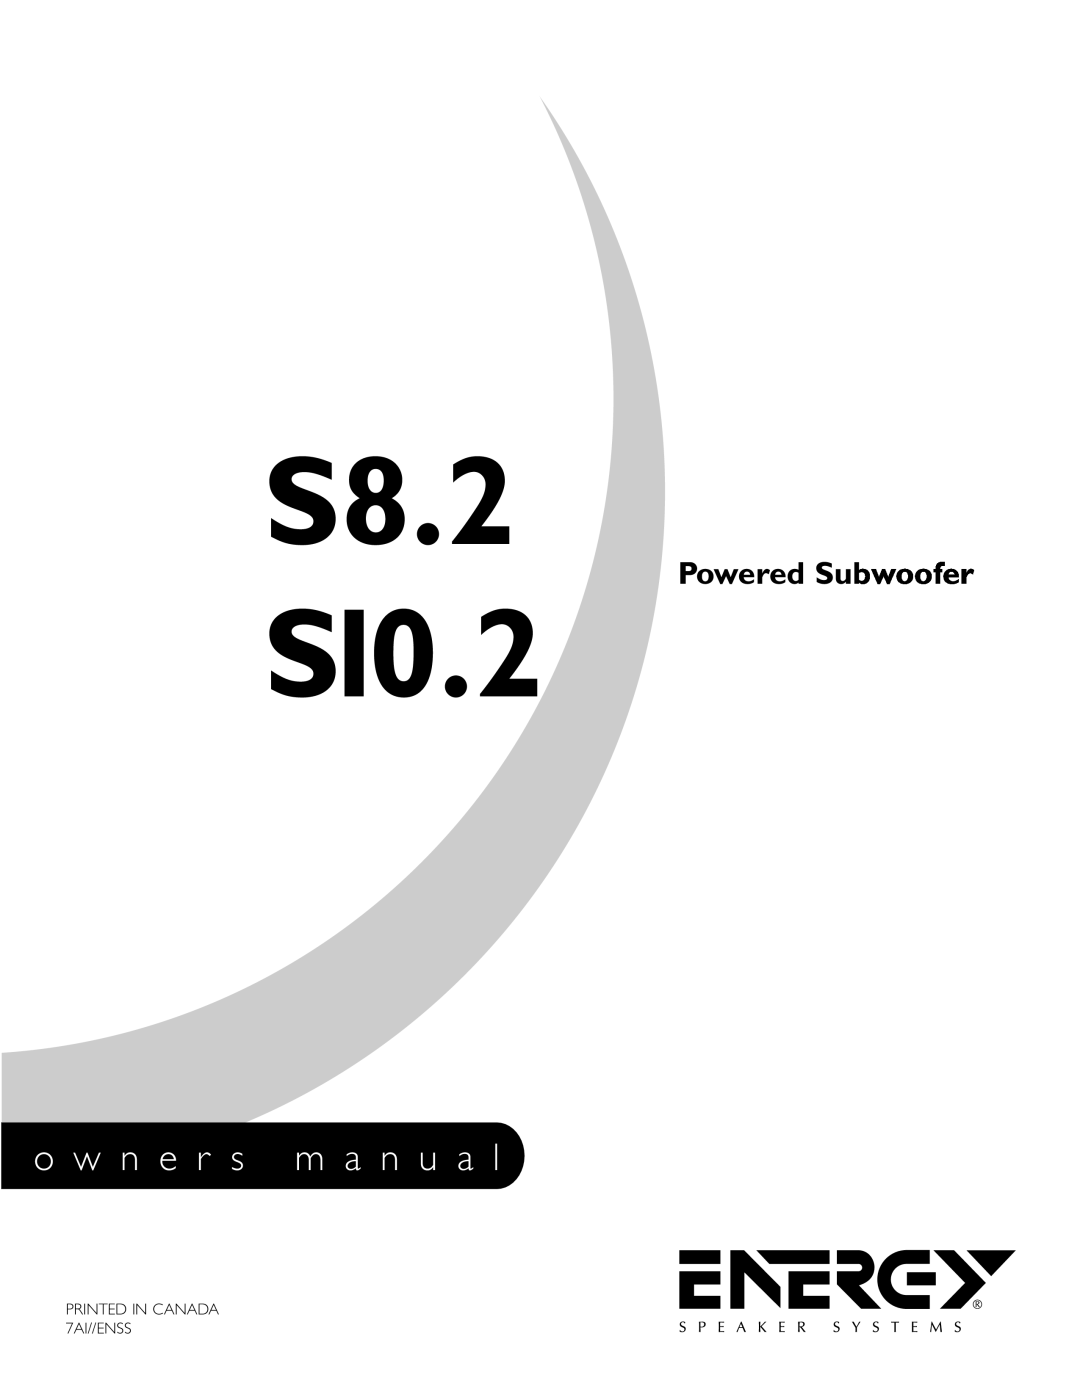 Energy Speaker Systems S10.2 owner manual S8.2, o w n e r s m a n u a l, Powered Subwoofer 